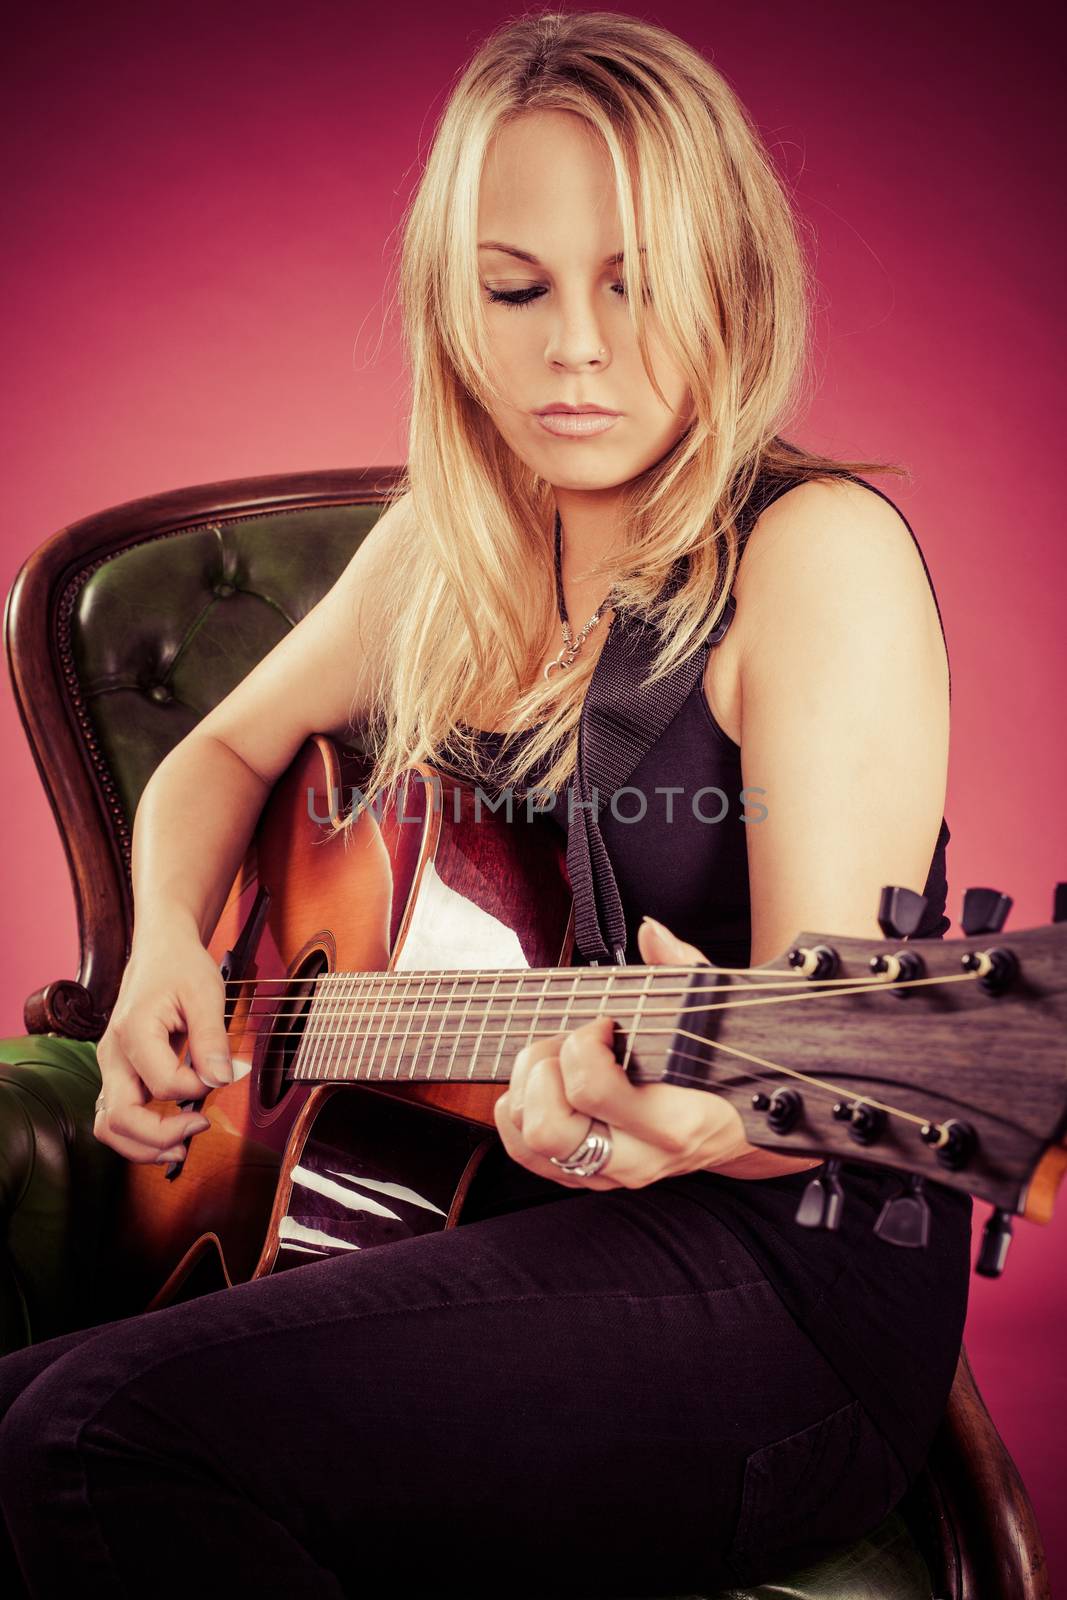 Photo of a beautiful blond female playing an acoustic guitar.